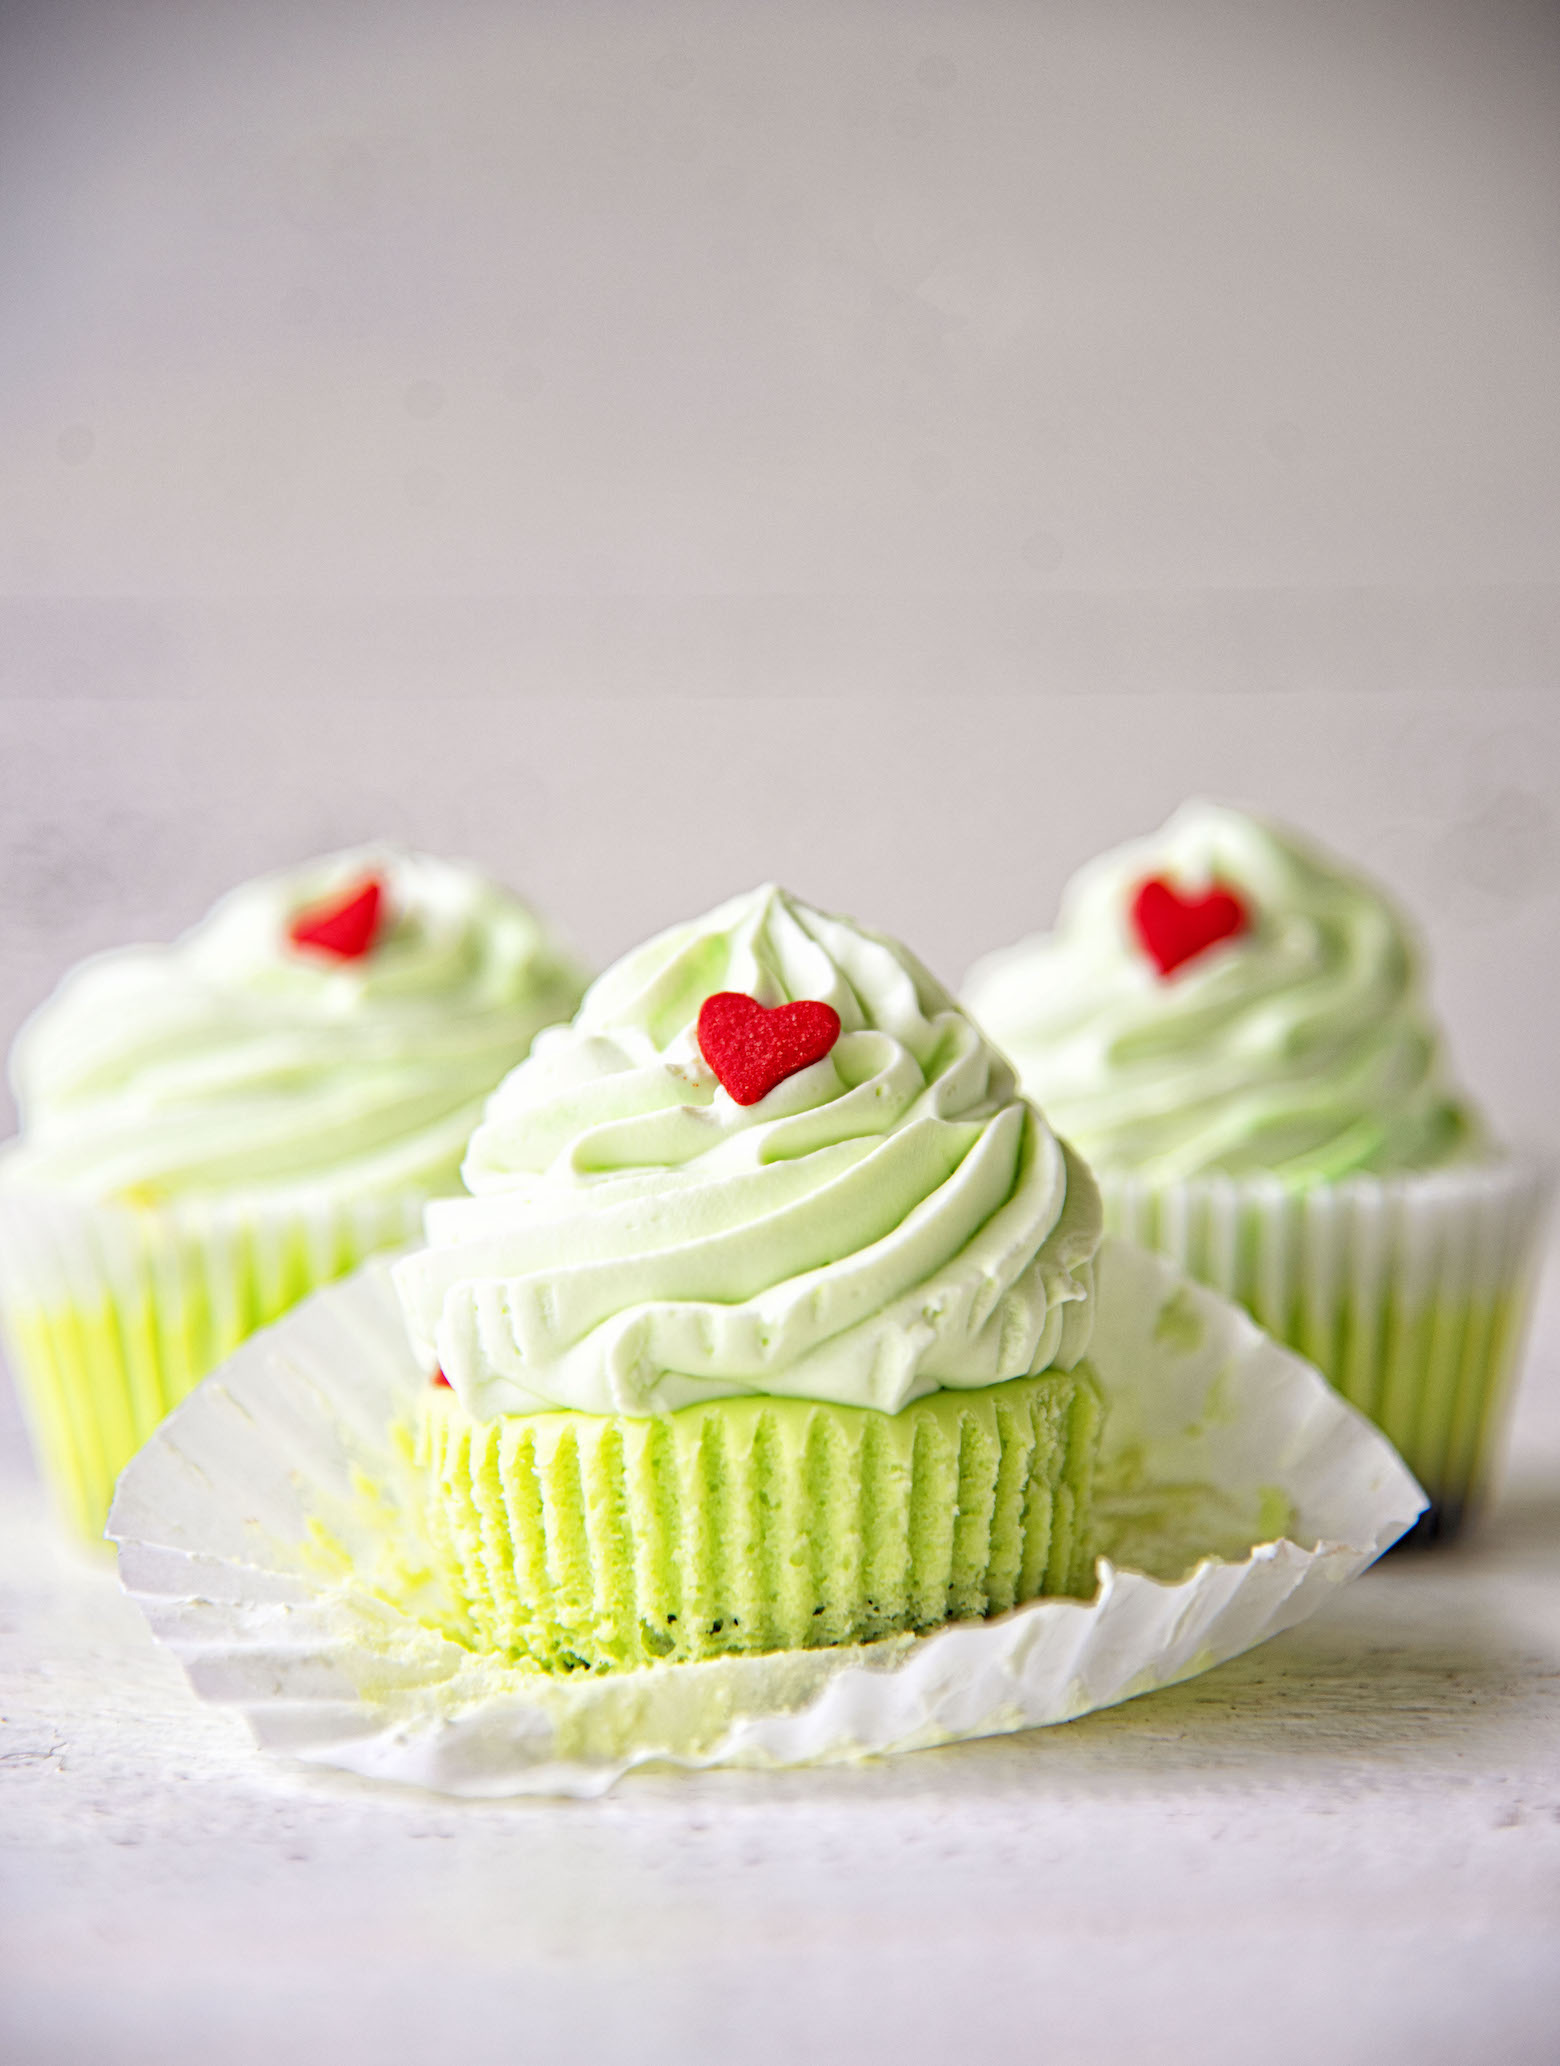 The Grinch Peppermint Cheesecake Cups